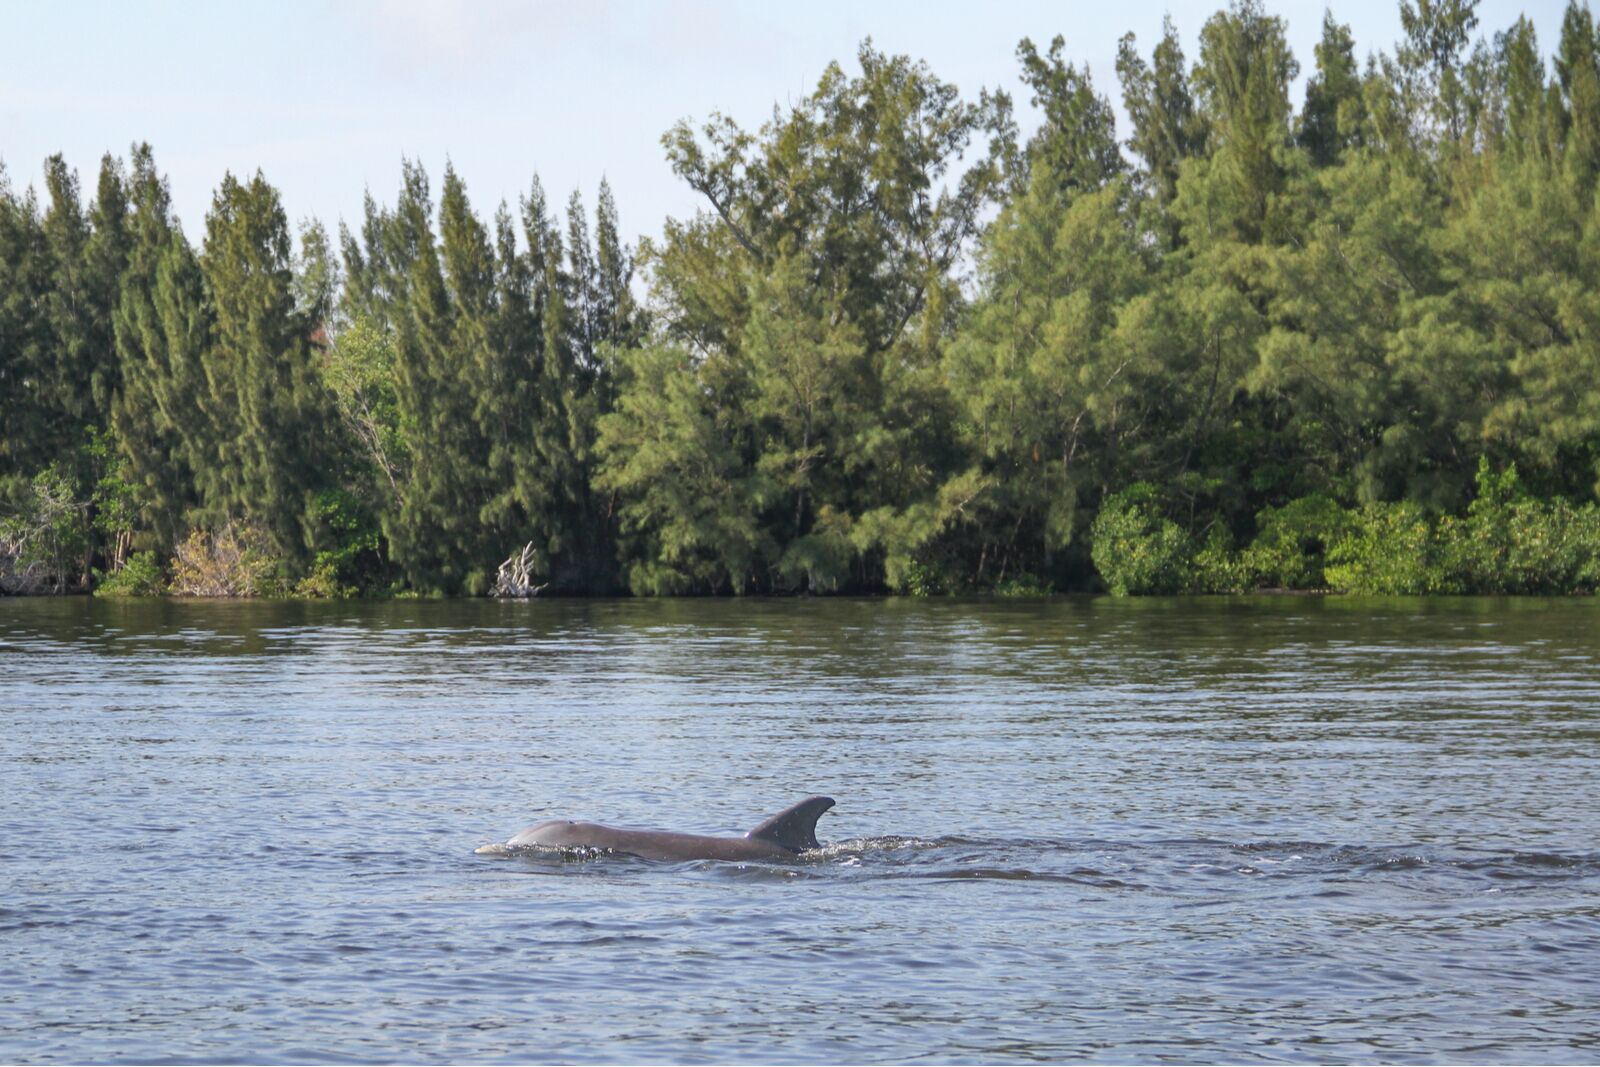 A dolphin swimming in the Indian River Lagoon